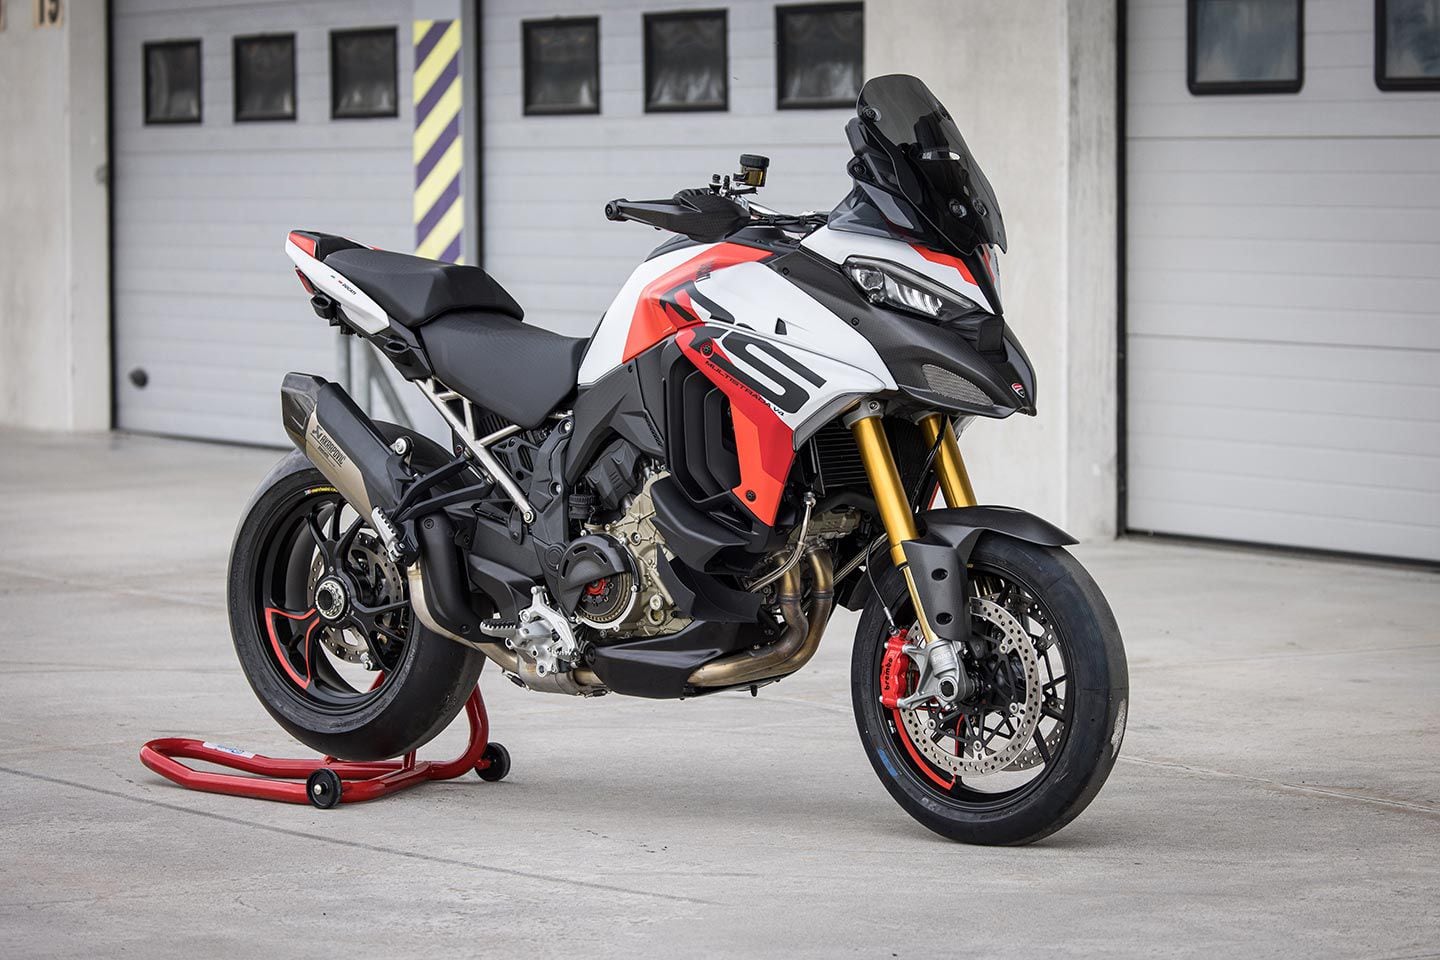 Our Multistrada V4 RS test unit was equipped with Pirelli slicks for a day at the track.